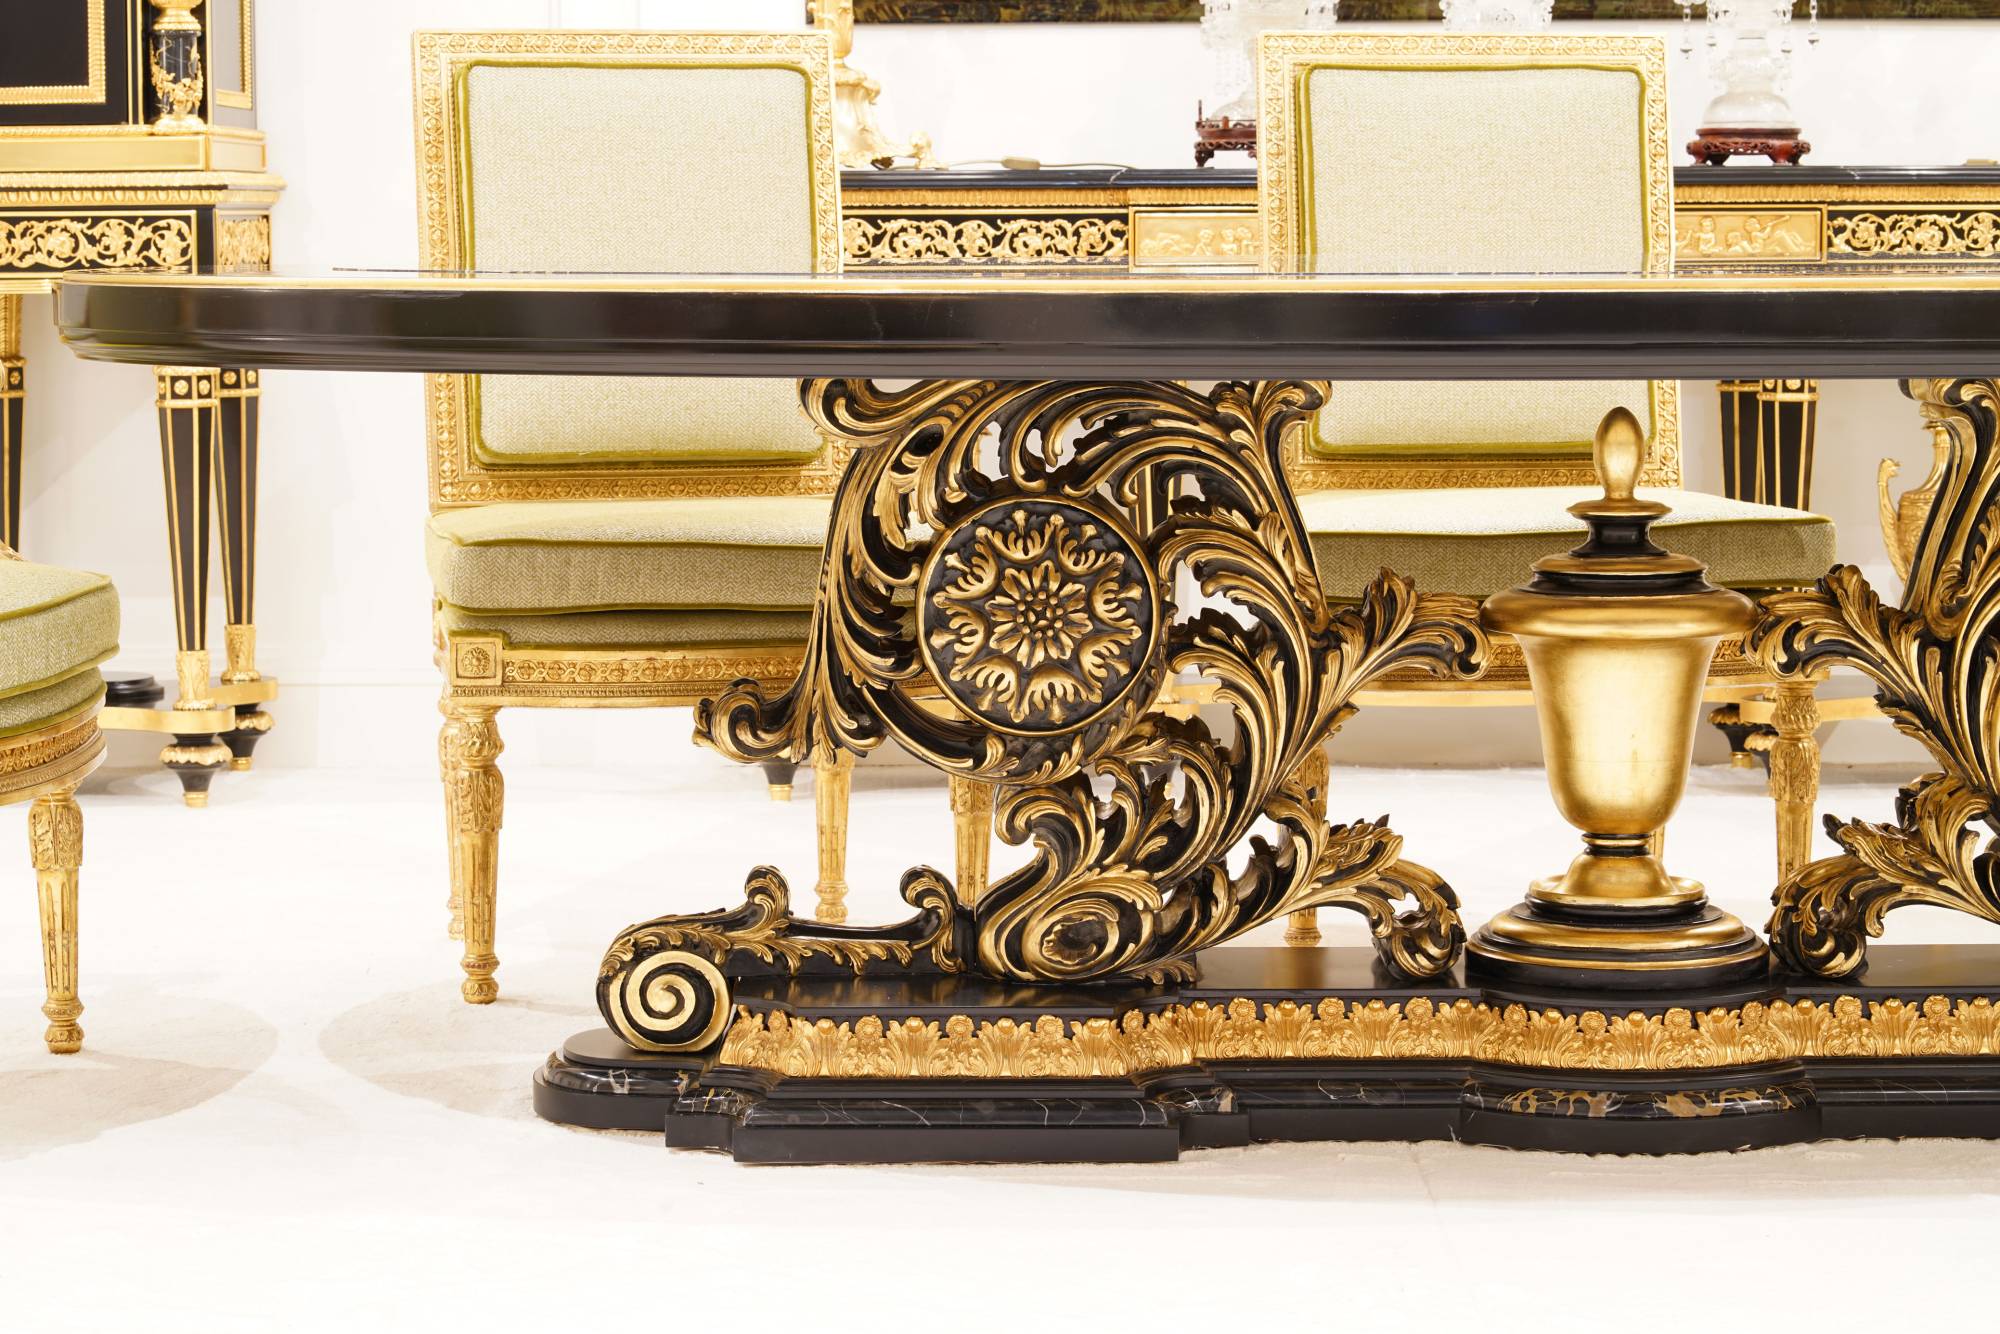 ART. 2204 – The elegance of luxury classic Tables made in Italy by C.G. Capelletti.